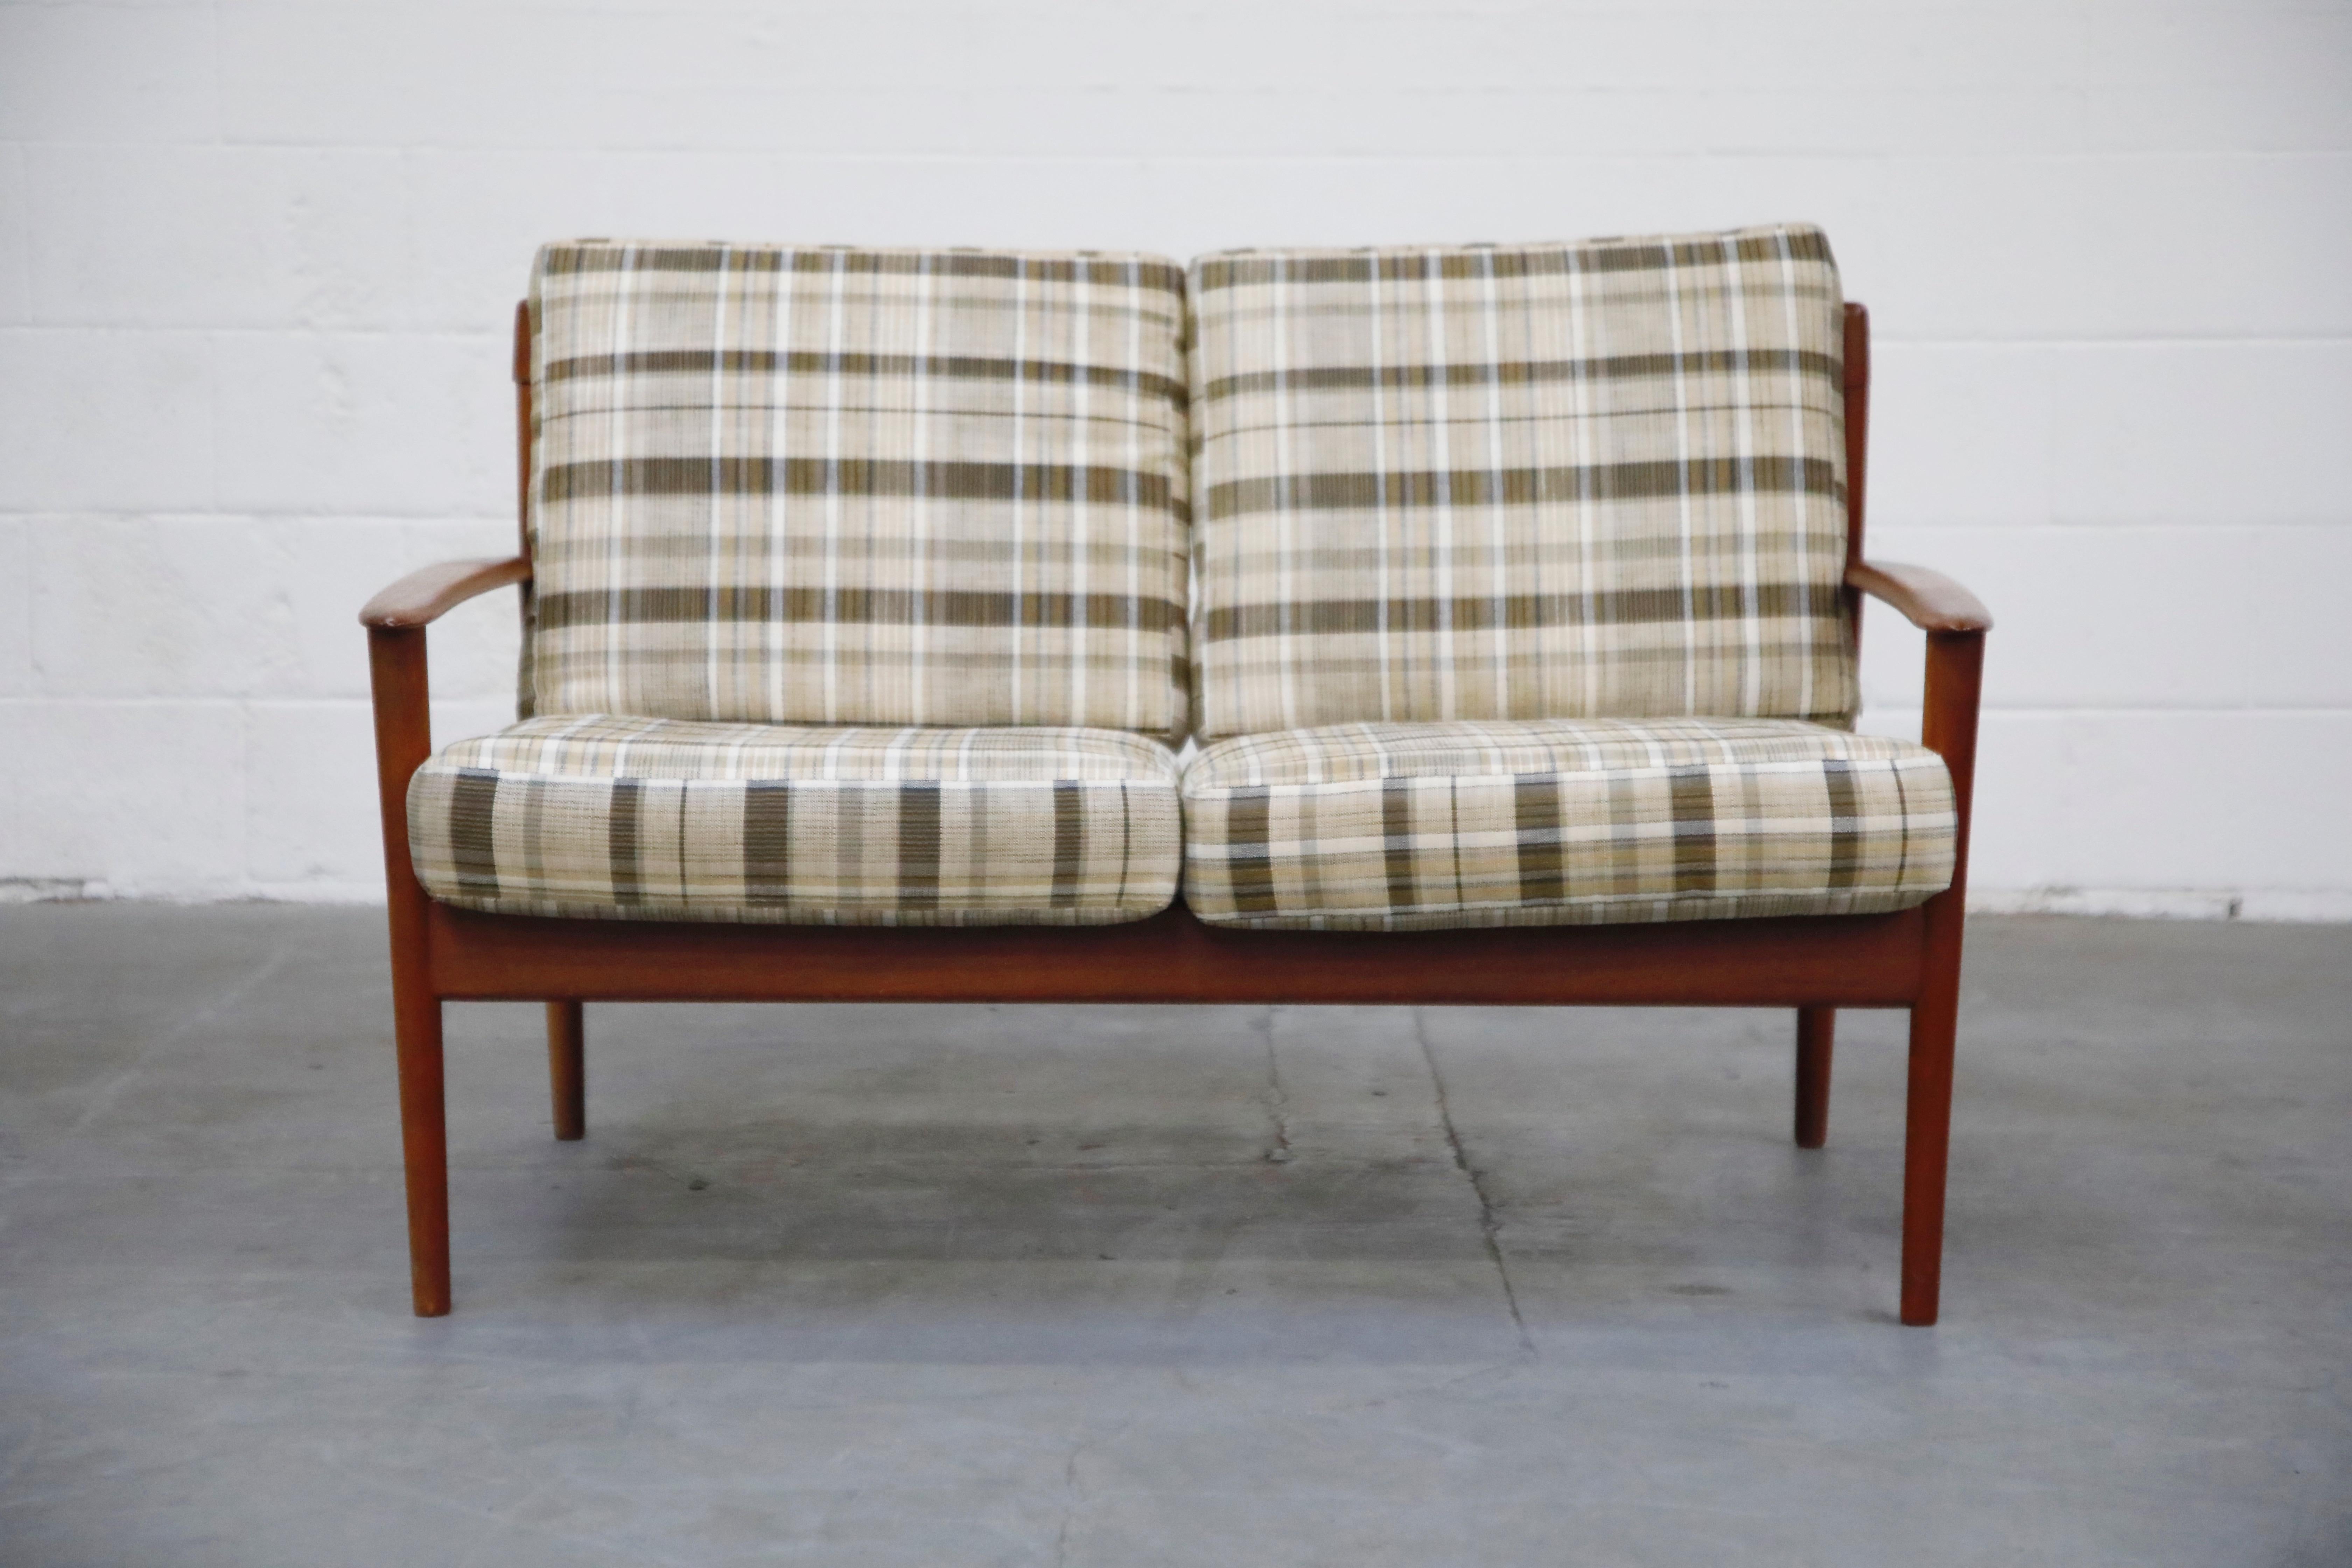 This lovely circa 1960 Danish modern teak settee is attributed to Folke Ohlsson for DUX, and shares similar styling to Hans Wegner's Cigar sofa and designs by Arne Vodder. The deep teak tones and sculpted arms and slatted wood back makes this an